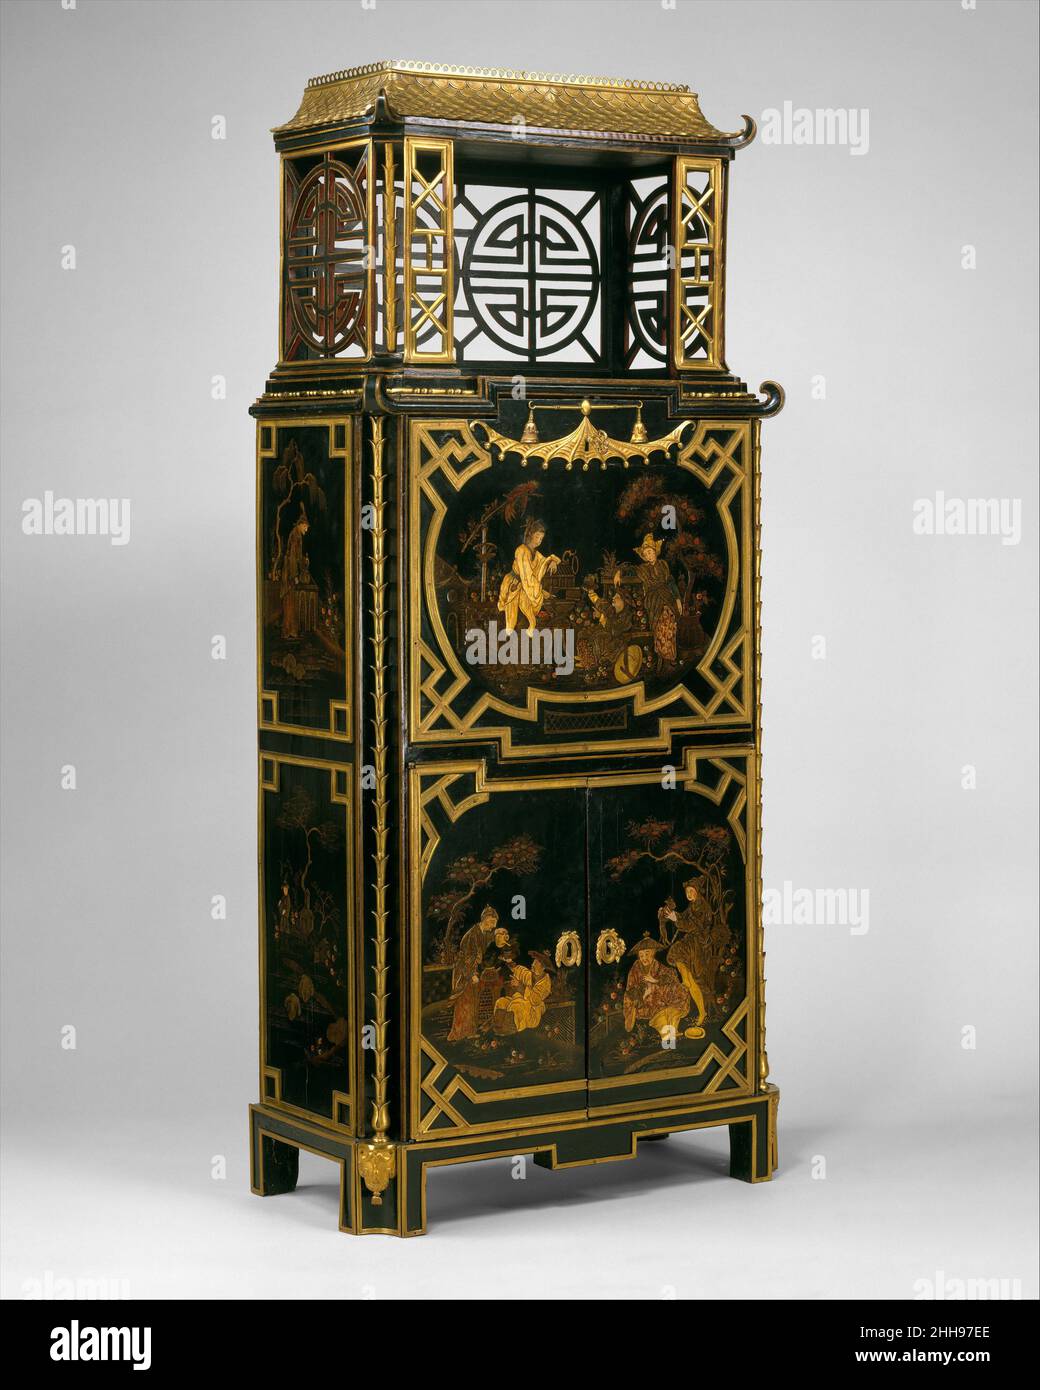 Drop-front secretaire (secrètaire à abattant) ca. 1770–75 René Dubois The form of this secretary, with its pierced pagoda-shaped top, is exceptional in French furniture. Although furniture in the Chinese taste was designed and executed in England during the second half of the eighteenth century, French chinoiserie was almost always limited to the surface decoration. The Oriental scenes in imitation lacquer on the front panels are based on designs for The Four Elements by François Boucher, known from engravings (1740) by Pierre Aveline. The element of fire, apparently the only one for which the Stock Photo